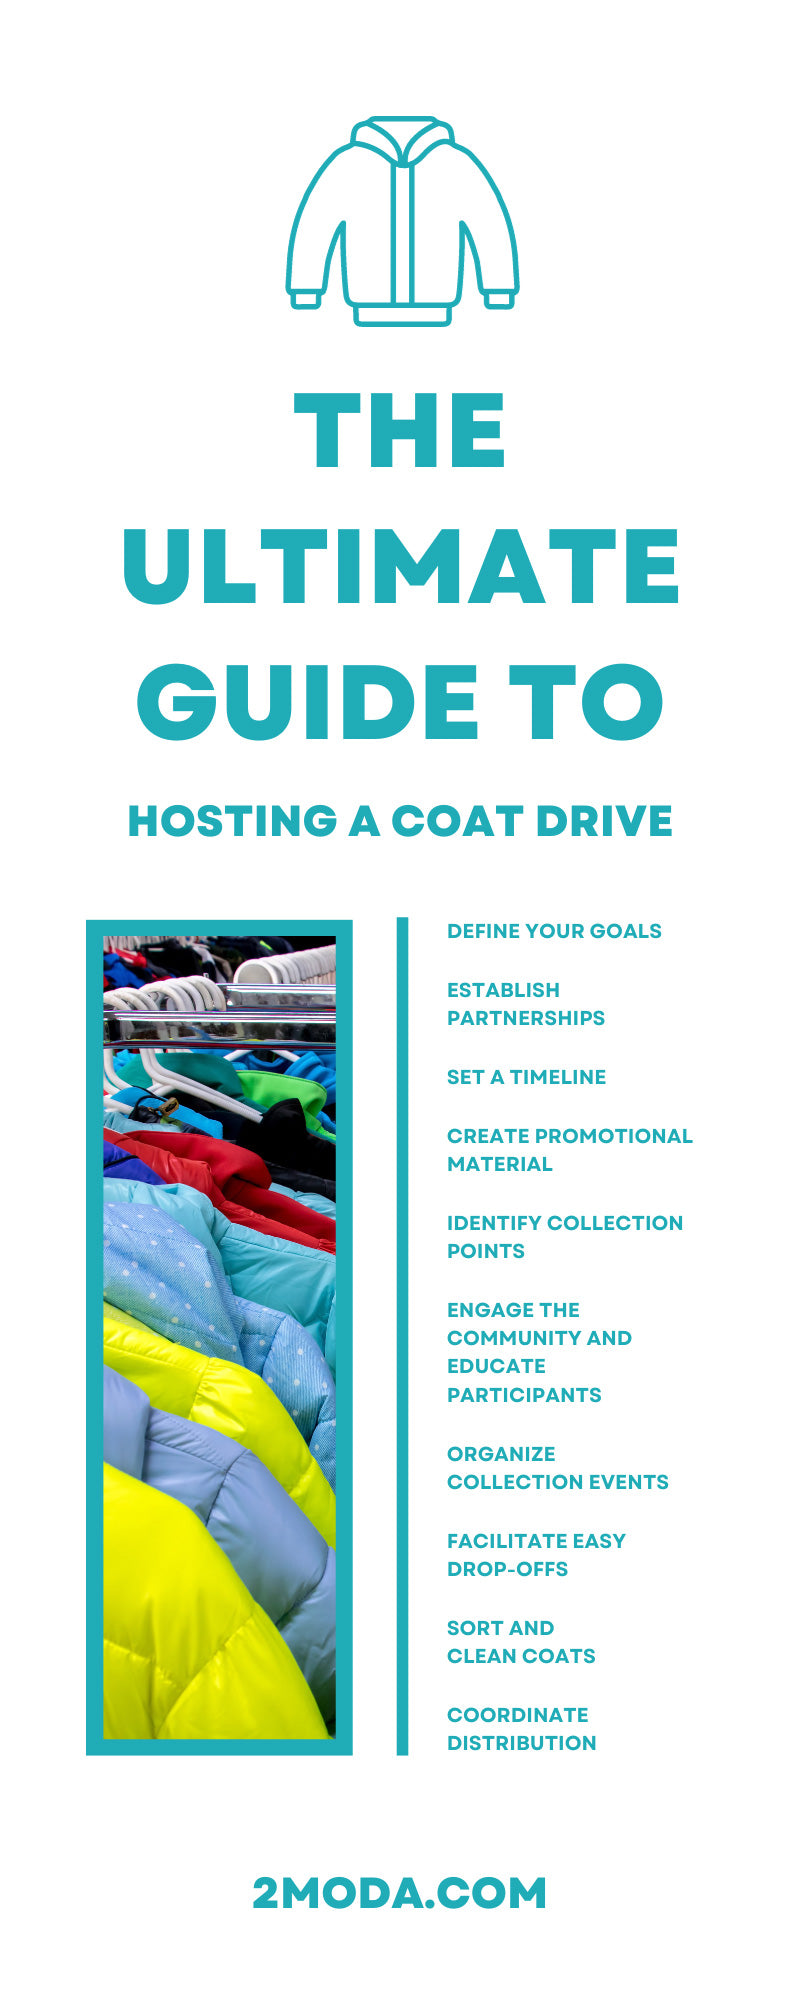 The Ultimate Guide to Hosting a Coat Drive